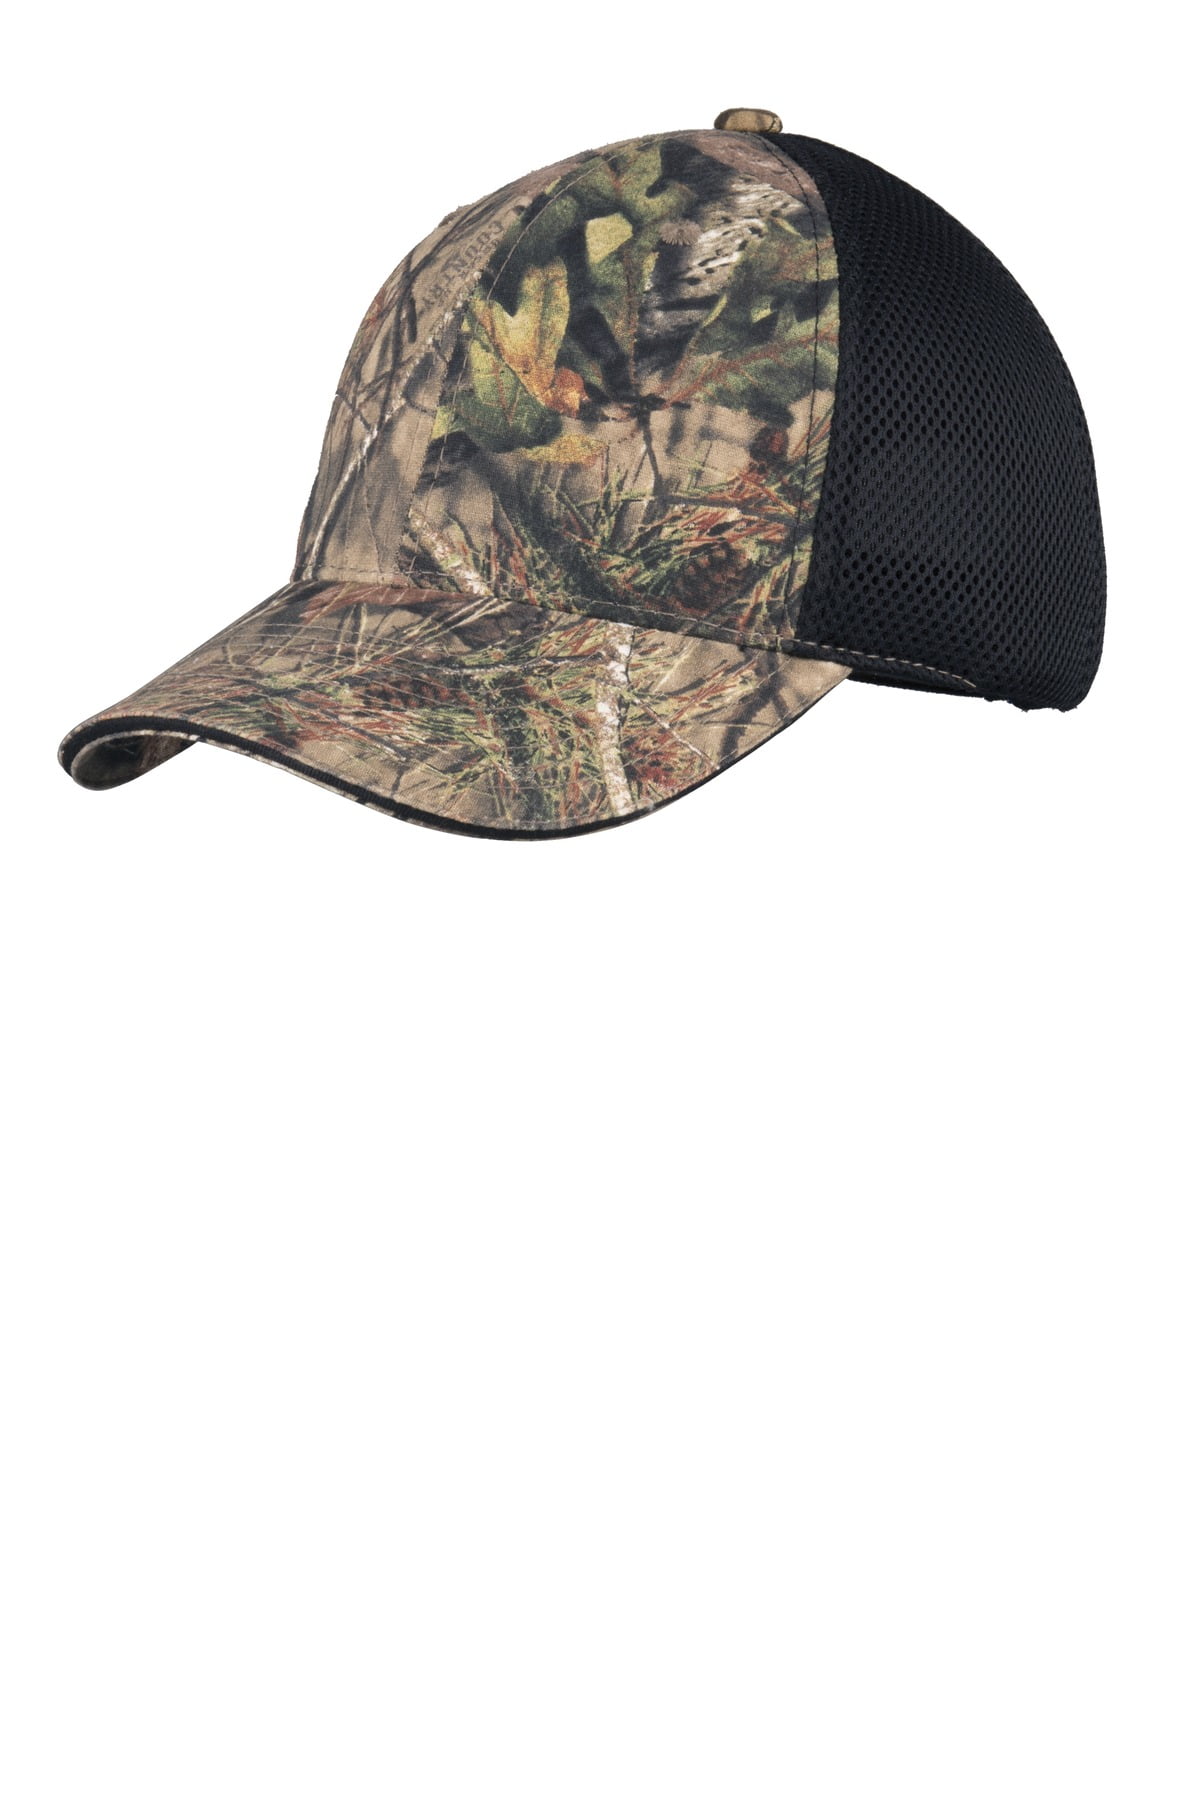 Port Authority C912 Camouflage Cap with Air Mesh Back, Mossy Oak Break-Up  Country/Black Mesh, OSFA 